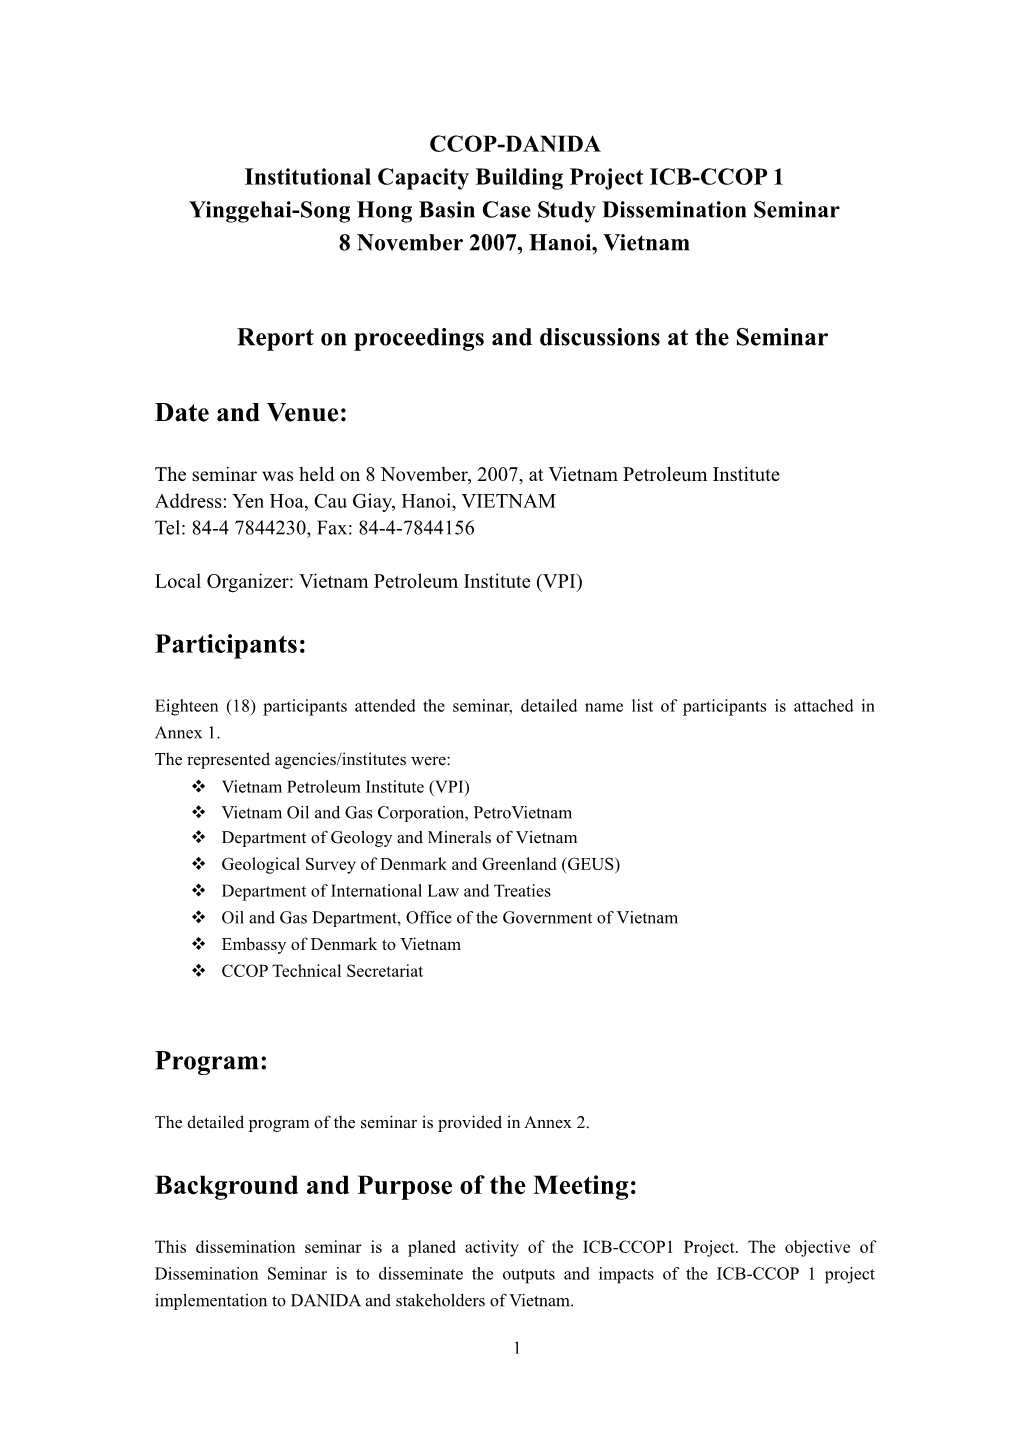 Participants: Program: Background and Purpose of the Meeting